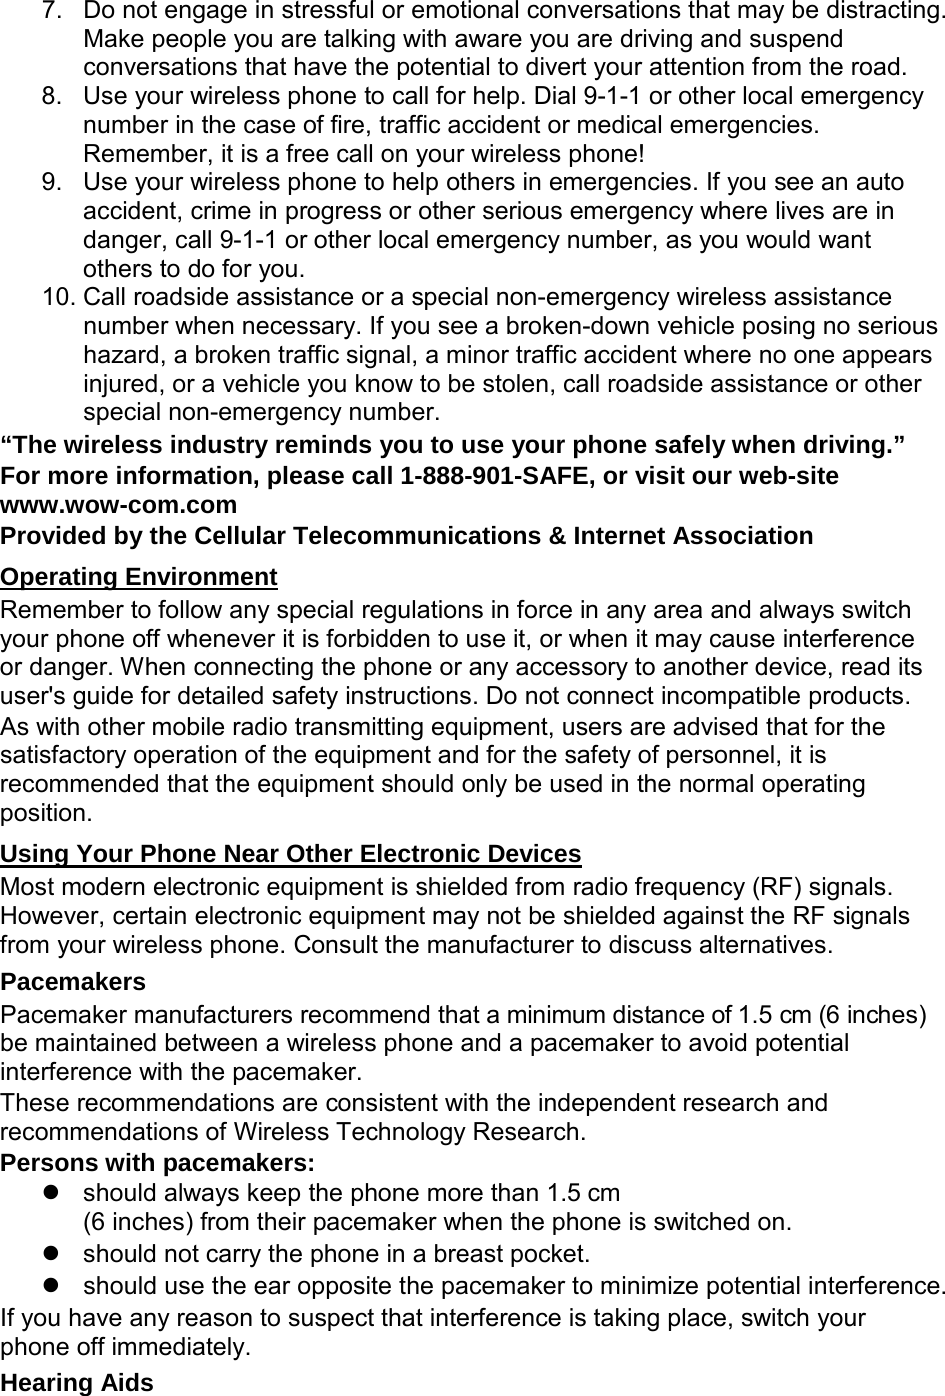 7. Do not engage in stressful or emotional conversations that may be distracting. Make people you are talking with aware you are driving and suspend conversations that have the potential to divert your attention from the road. 8. Use your wireless phone to call for help. Dial 9-1-1 or other local emergency number in the case of fire, traffic accident or medical emergencies. Remember, it is a free call on your wireless phone! 9. Use your wireless phone to help others in emergencies. If you see an auto accident, crime in progress or other serious emergency where lives are in danger, call 9-1-1 or other local emergency number, as you would want others to do for you. 10. Call roadside assistance or a special non-emergency wireless assistance number when necessary. If you see a broken-down vehicle posing no serious hazard, a broken traffic signal, a minor traffic accident where no one appears injured, or a vehicle you know to be stolen, call roadside assistance or other special non-emergency number. “The wireless industry reminds you to use your phone safely when driving.” For more information, please call 1-888-901-SAFE, or visit our web-site www.wow-com.com Provided by the Cellular Telecommunications &amp; Internet Association Remember to follow any special regulations in force in any area and always switch your phone off whenever it is forbidden to use it, or when it may cause interference or danger. When connecting the phone or any accessory to another device, read its user&apos;s guide for detailed safety instructions. Do not connect incompatible products. Operating Environment As with other mobile radio transmitting equipment, users are advised that for the satisfactory operation of the equipment and for the safety of personnel, it is recommended that the equipment should only be used in the normal operating position. Most modern electronic equipment is shielded from radio frequency (RF) signals. However, certain electronic equipment may not be shielded against the RF signals from your wireless phone. Consult the manufacturer to discuss alternatives. Using Your Phone Near Other Electronic Devices Pacemakers Pacemaker manufacturers recommend that a minimum distance of 1.5 cm (6 inches) be maintained between a wireless phone and a pacemaker to avoid potential interference with the pacemaker. These recommendations are consistent with the independent research and recommendations of Wireless Technology Research. Persons with pacemakers:  should always keep the phone more than 1.5 cm  (6 inches) from their pacemaker when the phone is switched on.  should not carry the phone in a breast pocket.  should use the ear opposite the pacemaker to minimize potential interference. If you have any reason to suspect that interference is taking place, switch your phone off immediately. Hearing Aids 